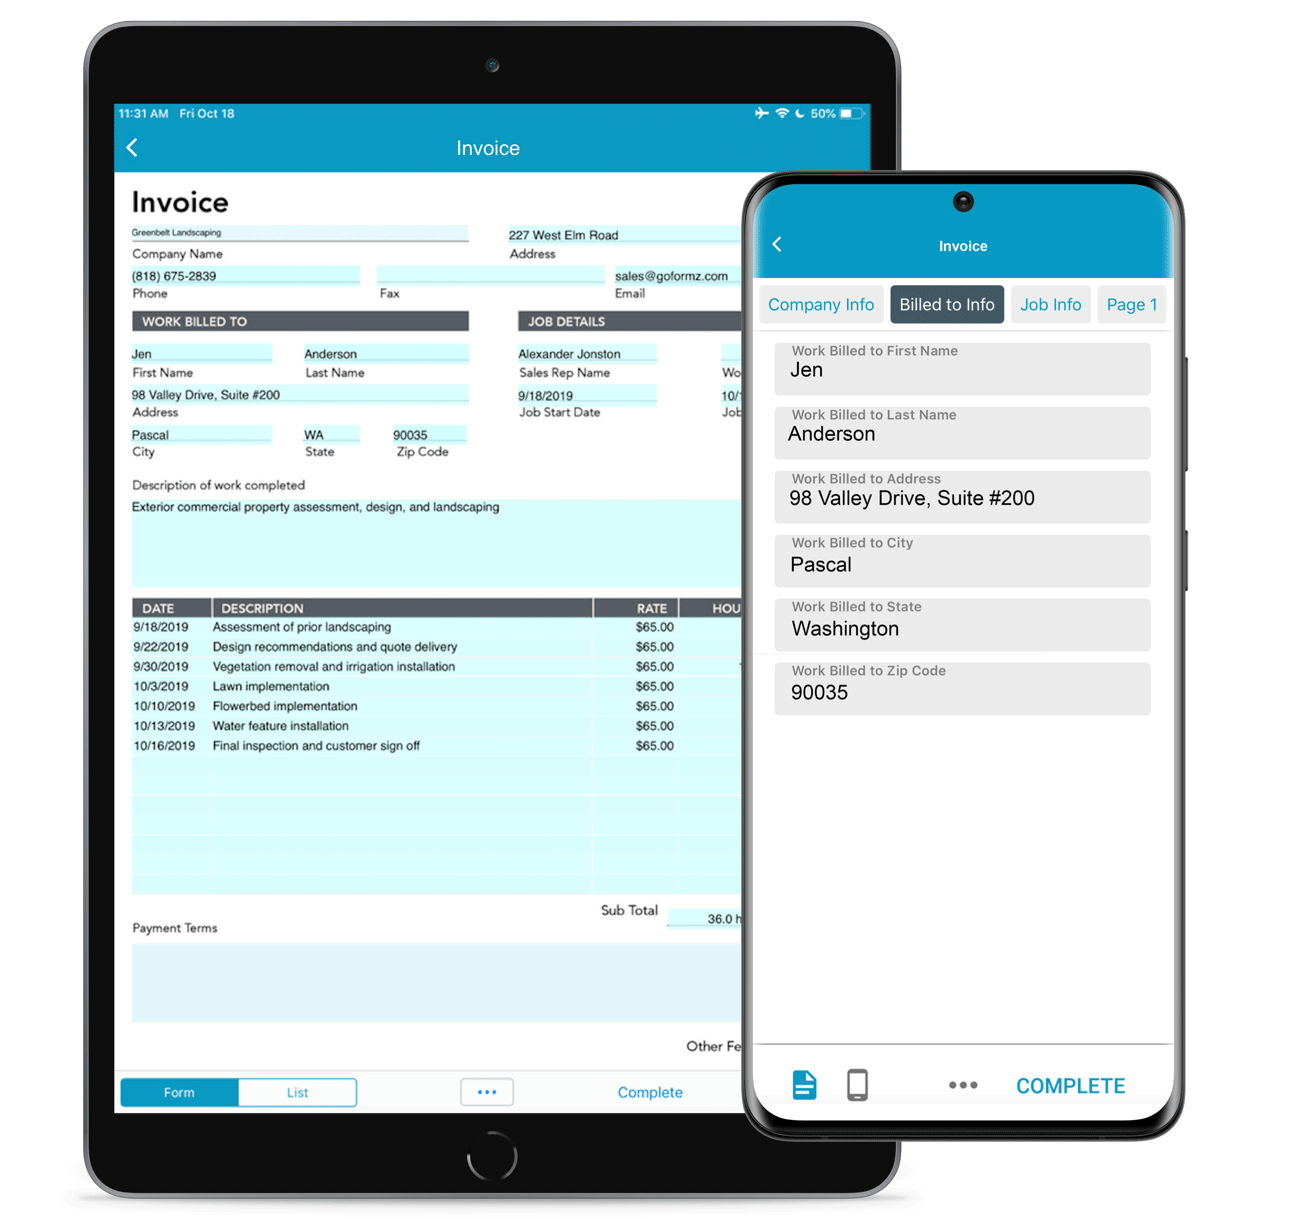 GoFormz mobile forms in use on Tablet and mobile phone